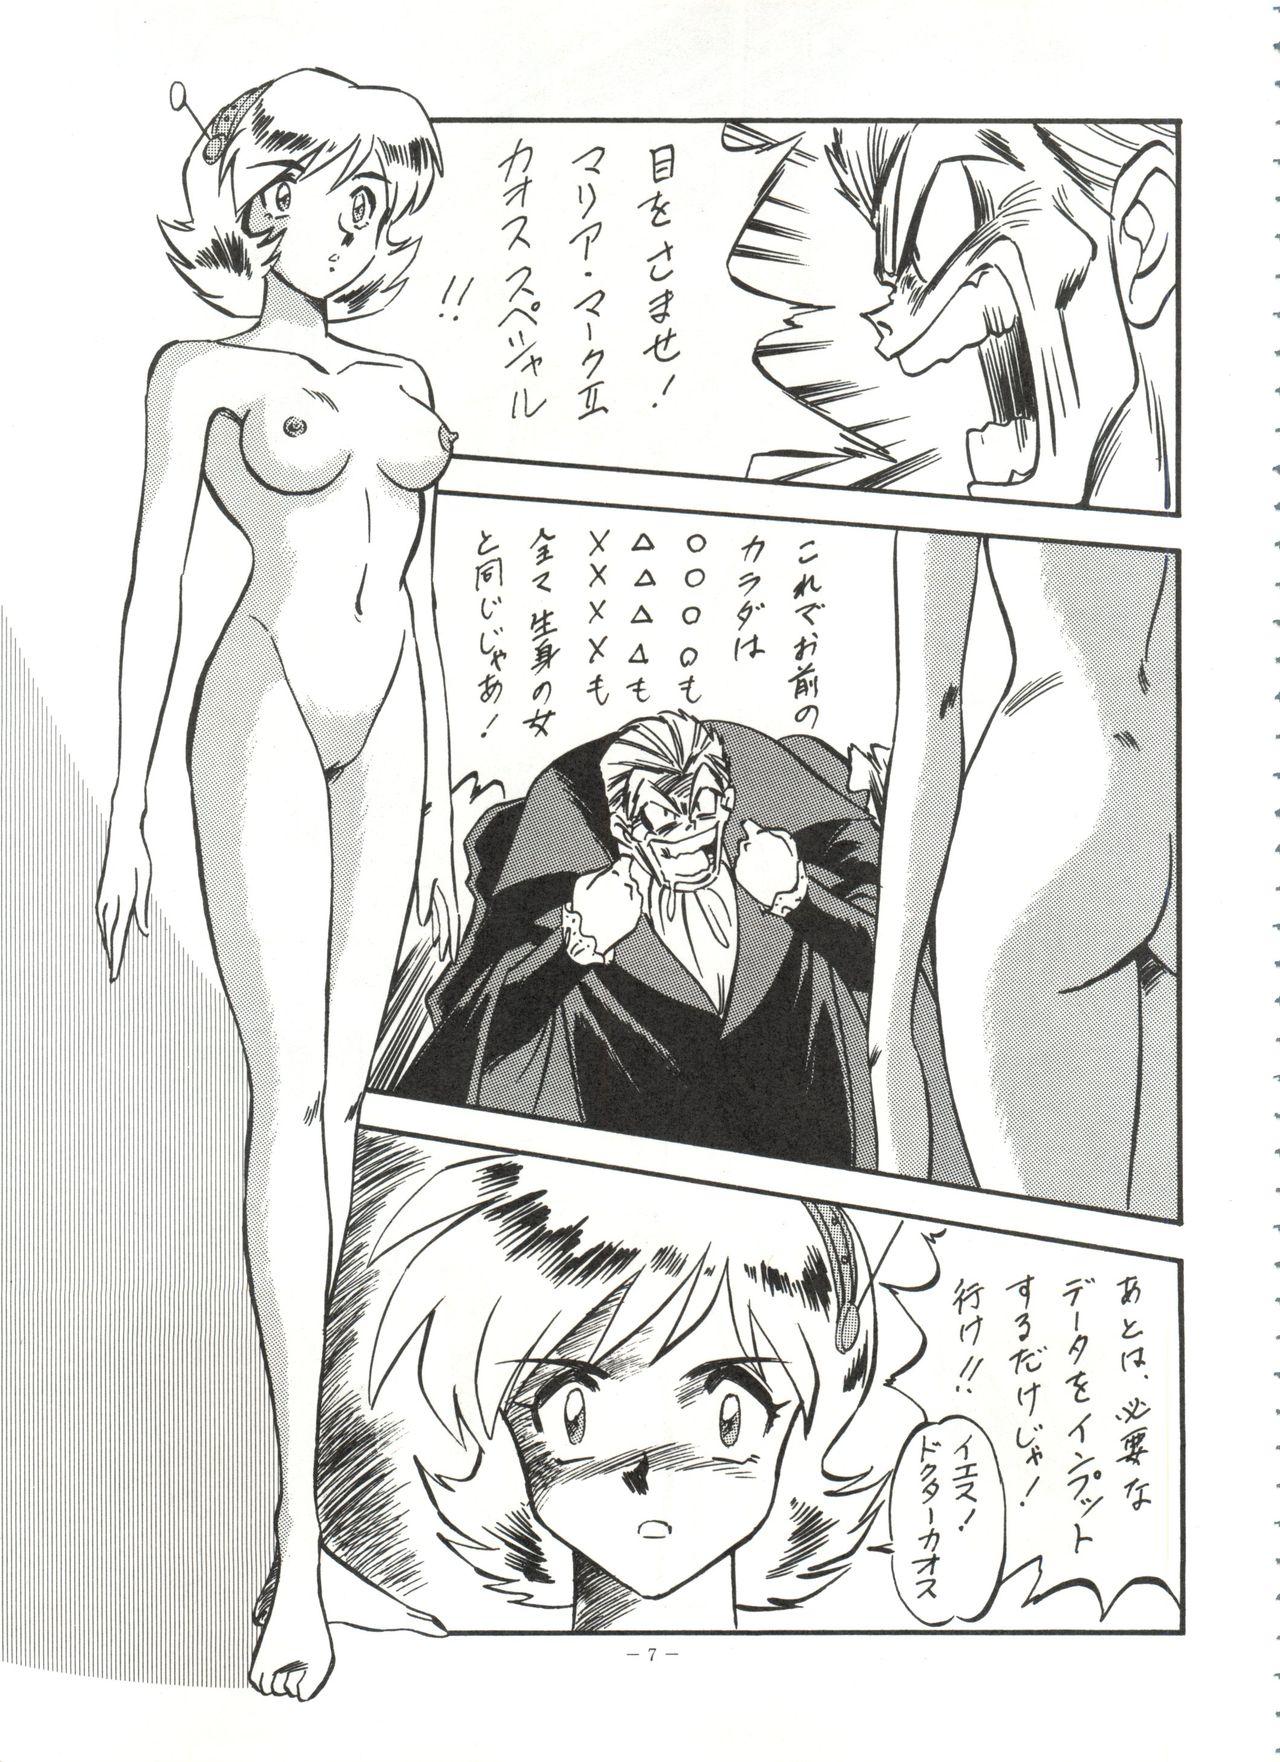 High Heels LOOK OUT 31 - Sailor moon Ghost sweeper mikami Lord of lords ryu knight Patlabor Brave police j-decker Big Black Cock - Page 6